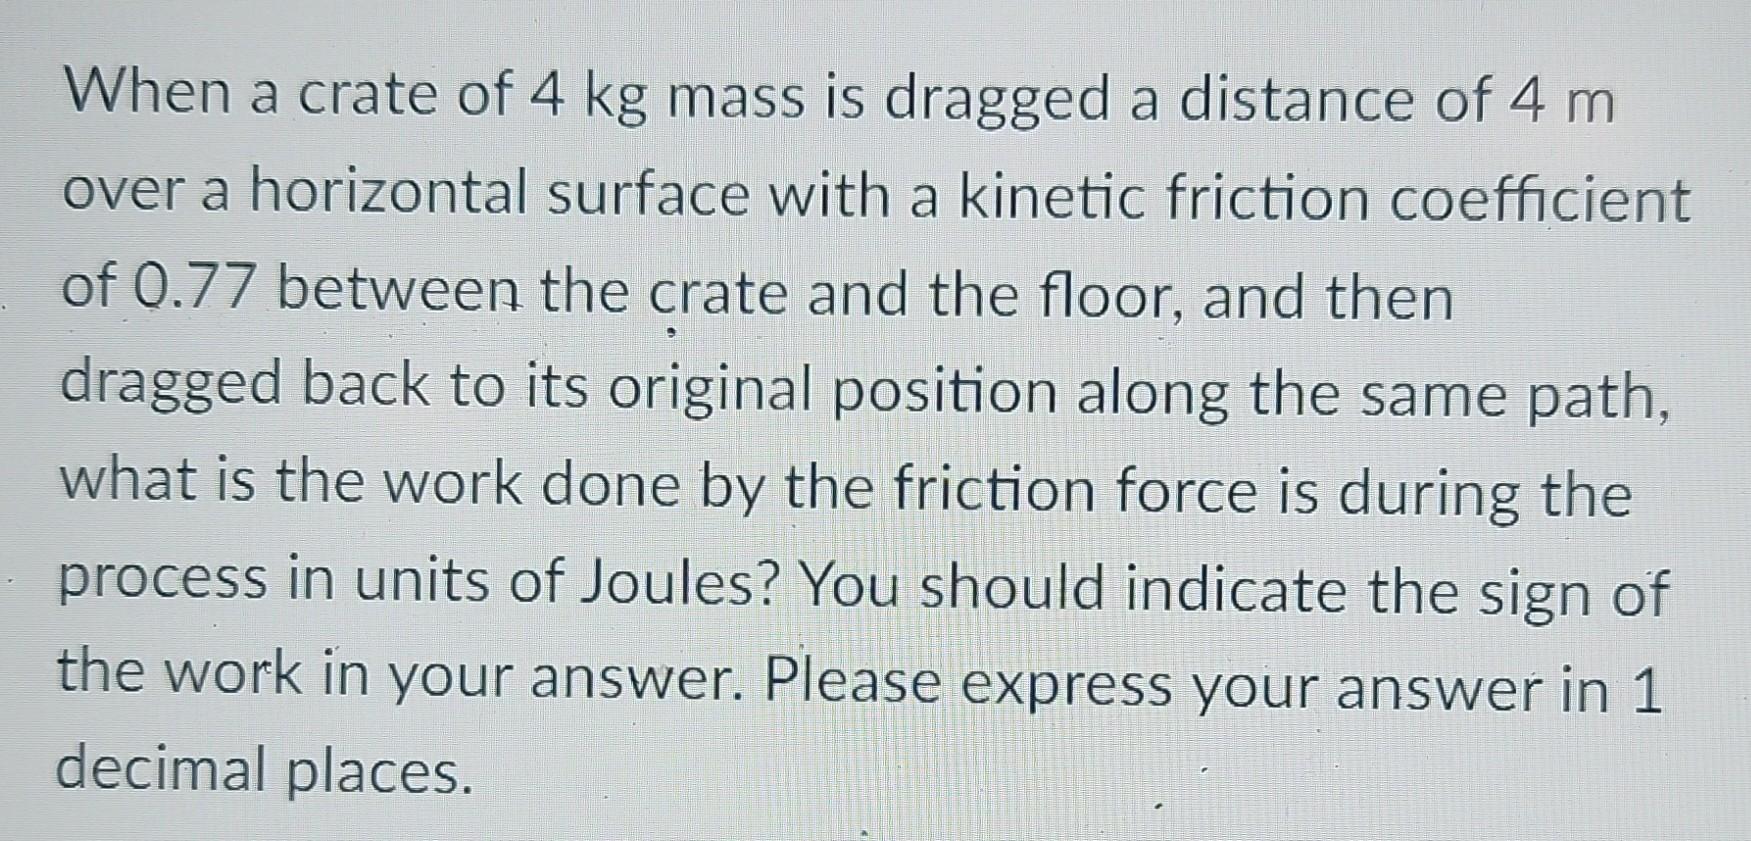 When a crate of 4 kg mass is dragged a distance of 4 m over a horizontal surface with a kinetic friction